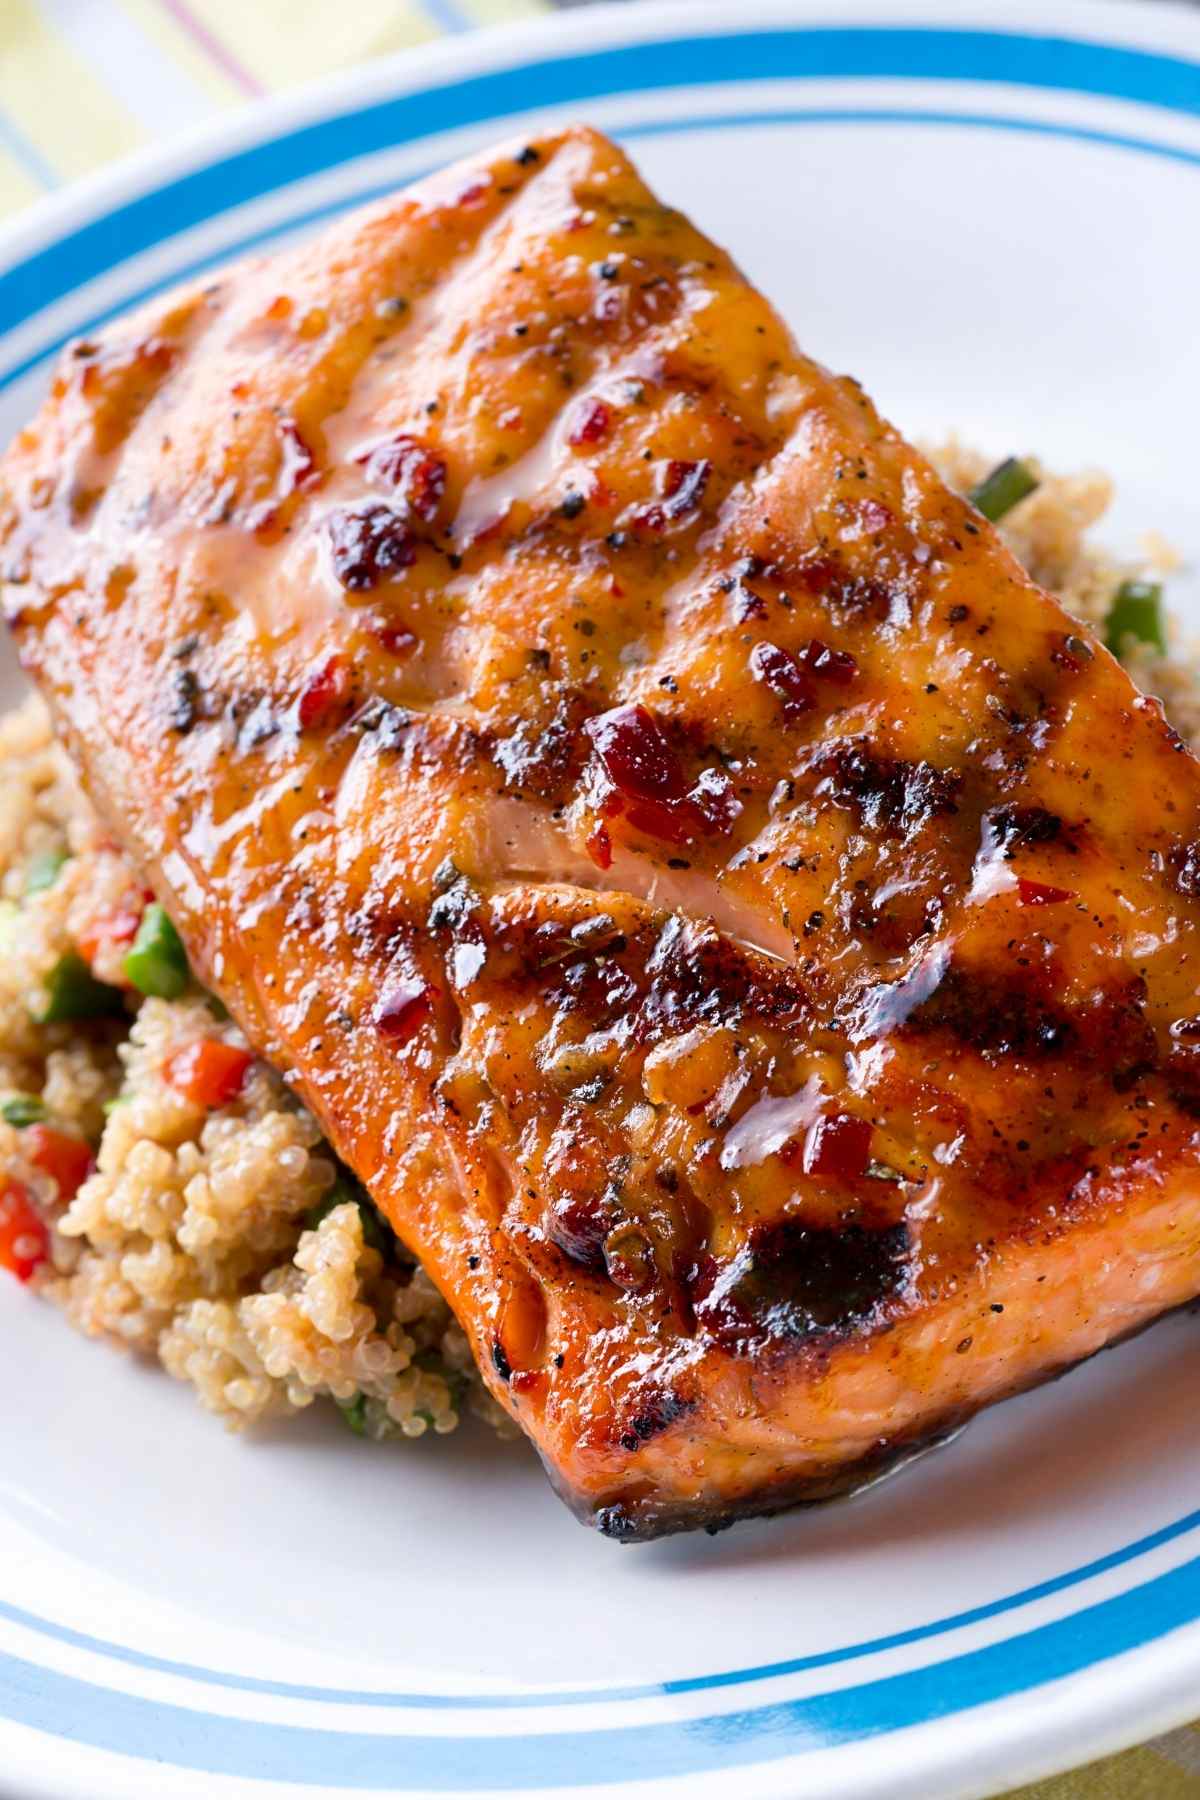 This marinade adds amazing flavor to grilled salmon. It’s a delicious combination of salty, tart, and savory flavors that pair exceptionally well with salmon.